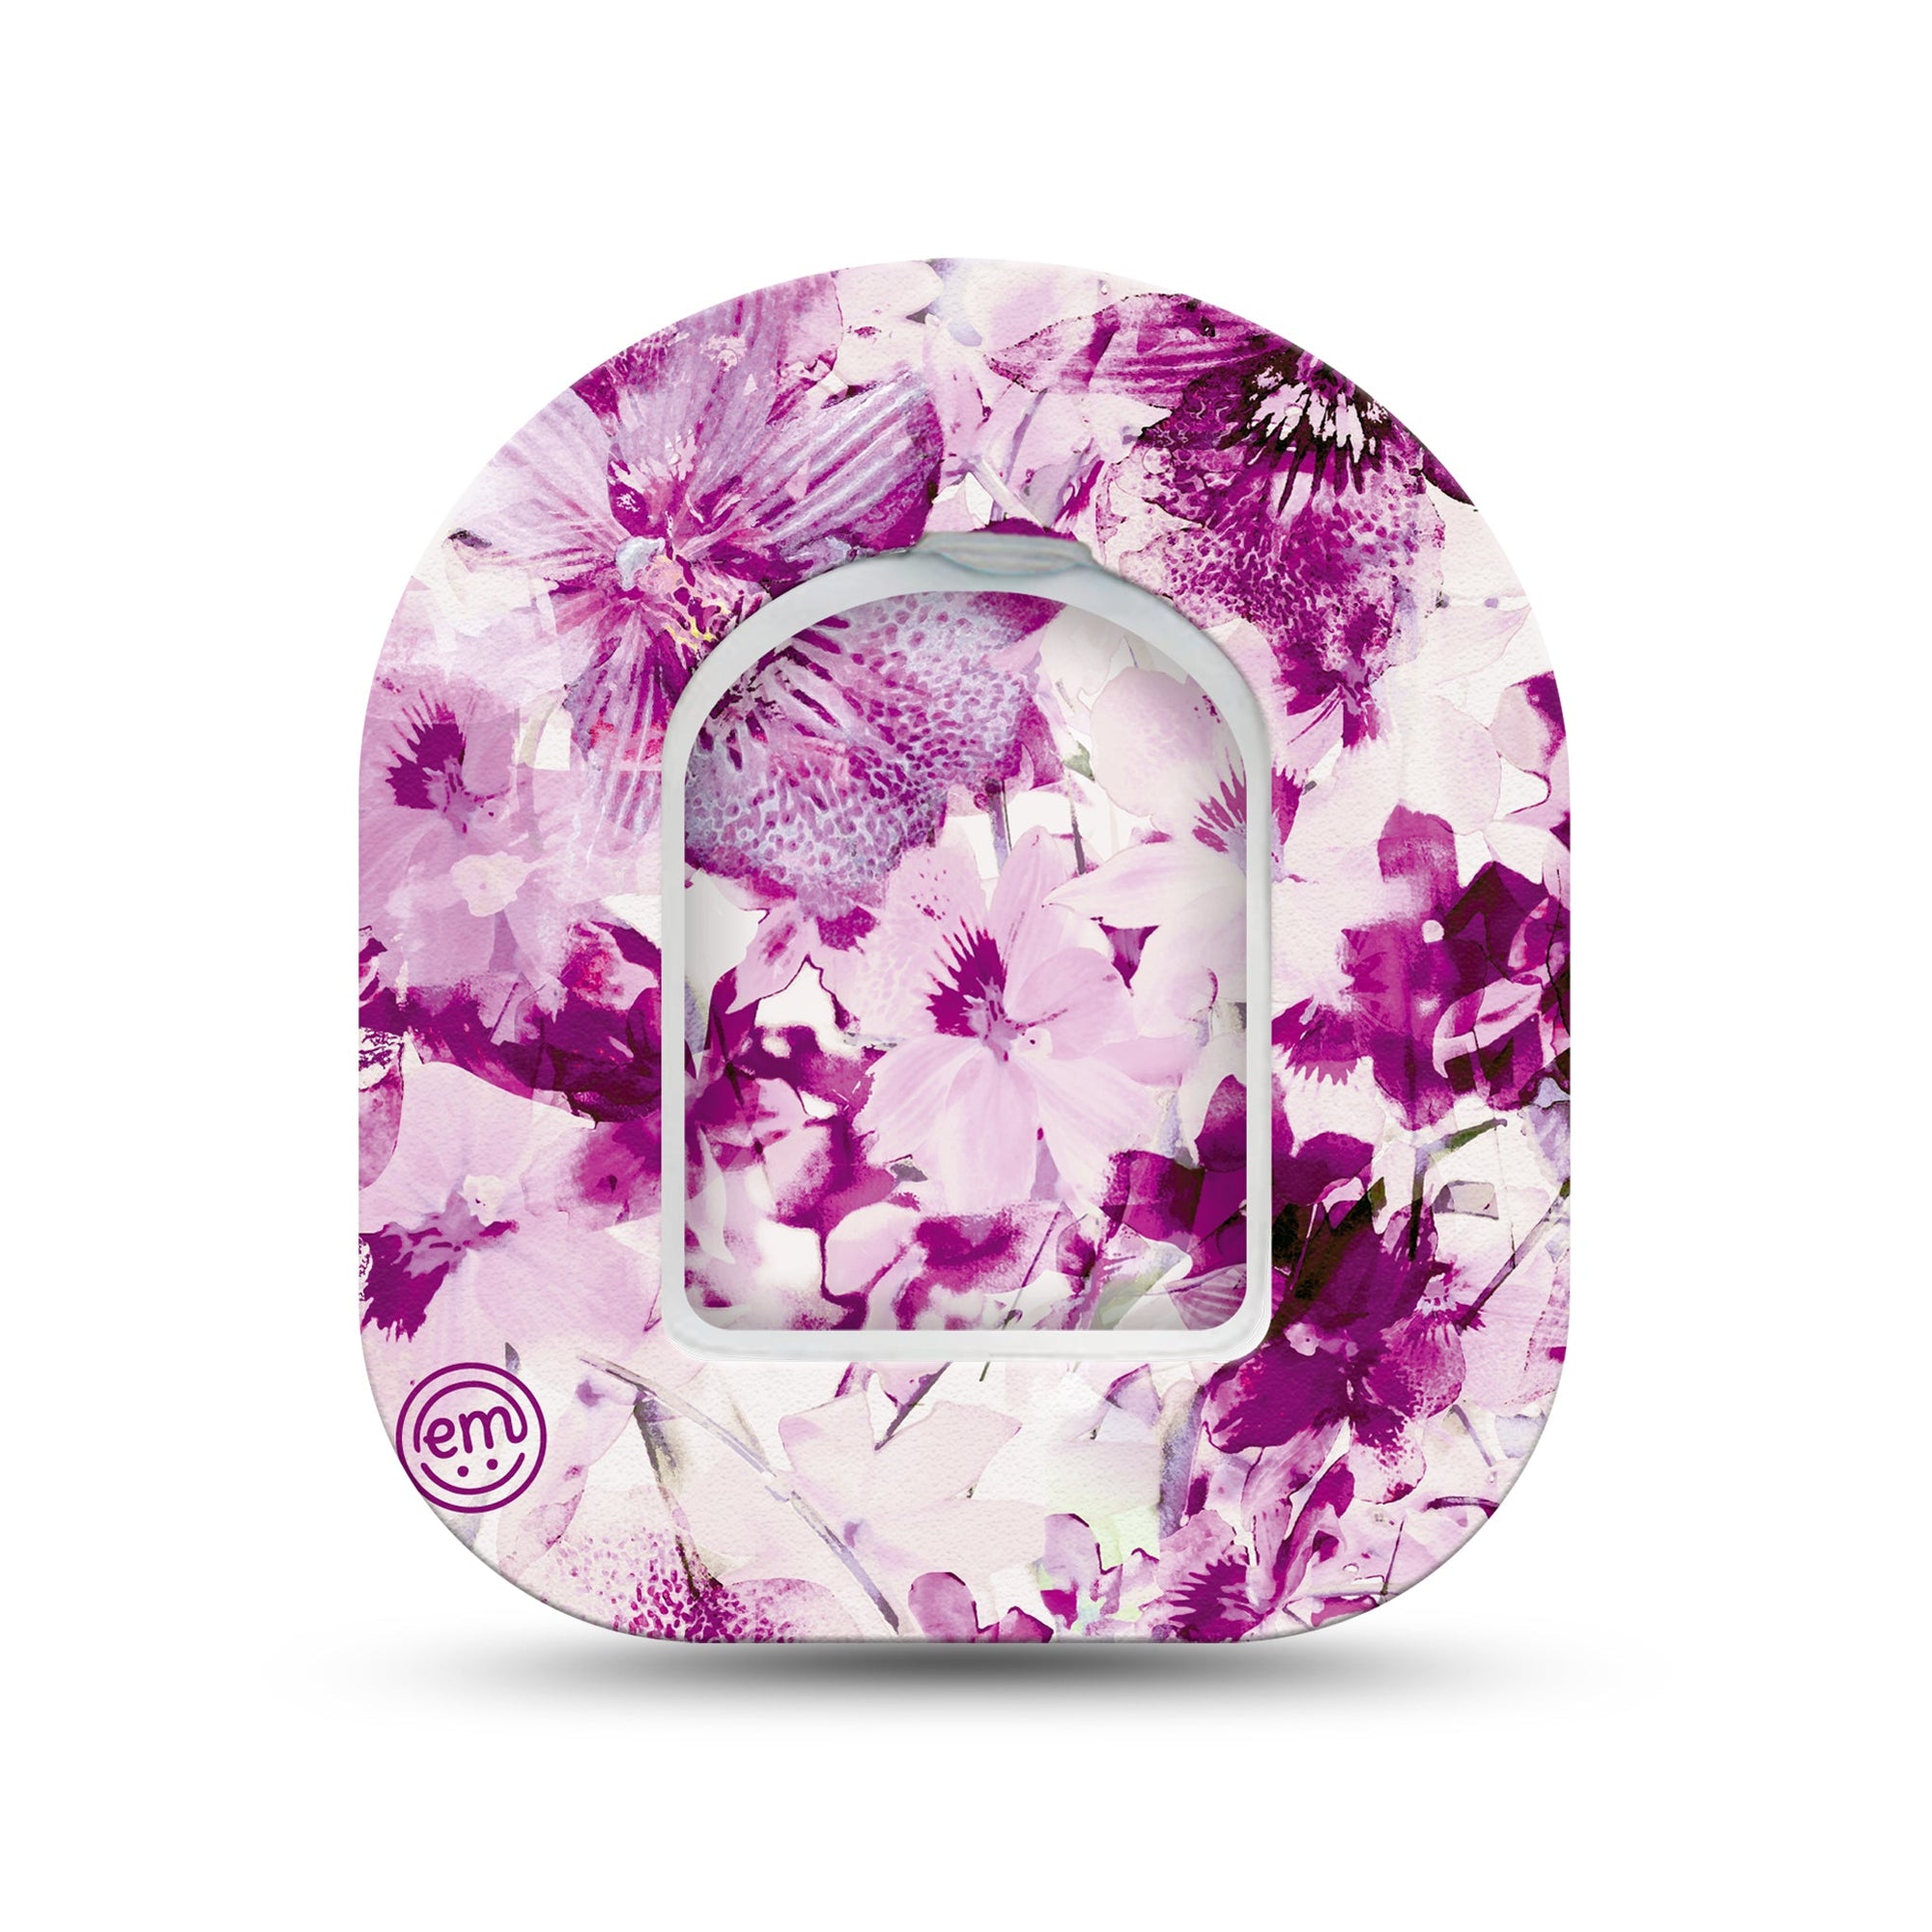 ExpressionMed Violet Orchids Pod Mini Tape Single Sticker and Single Tape, Orchid Beauty Adhesive Tape Pump Design